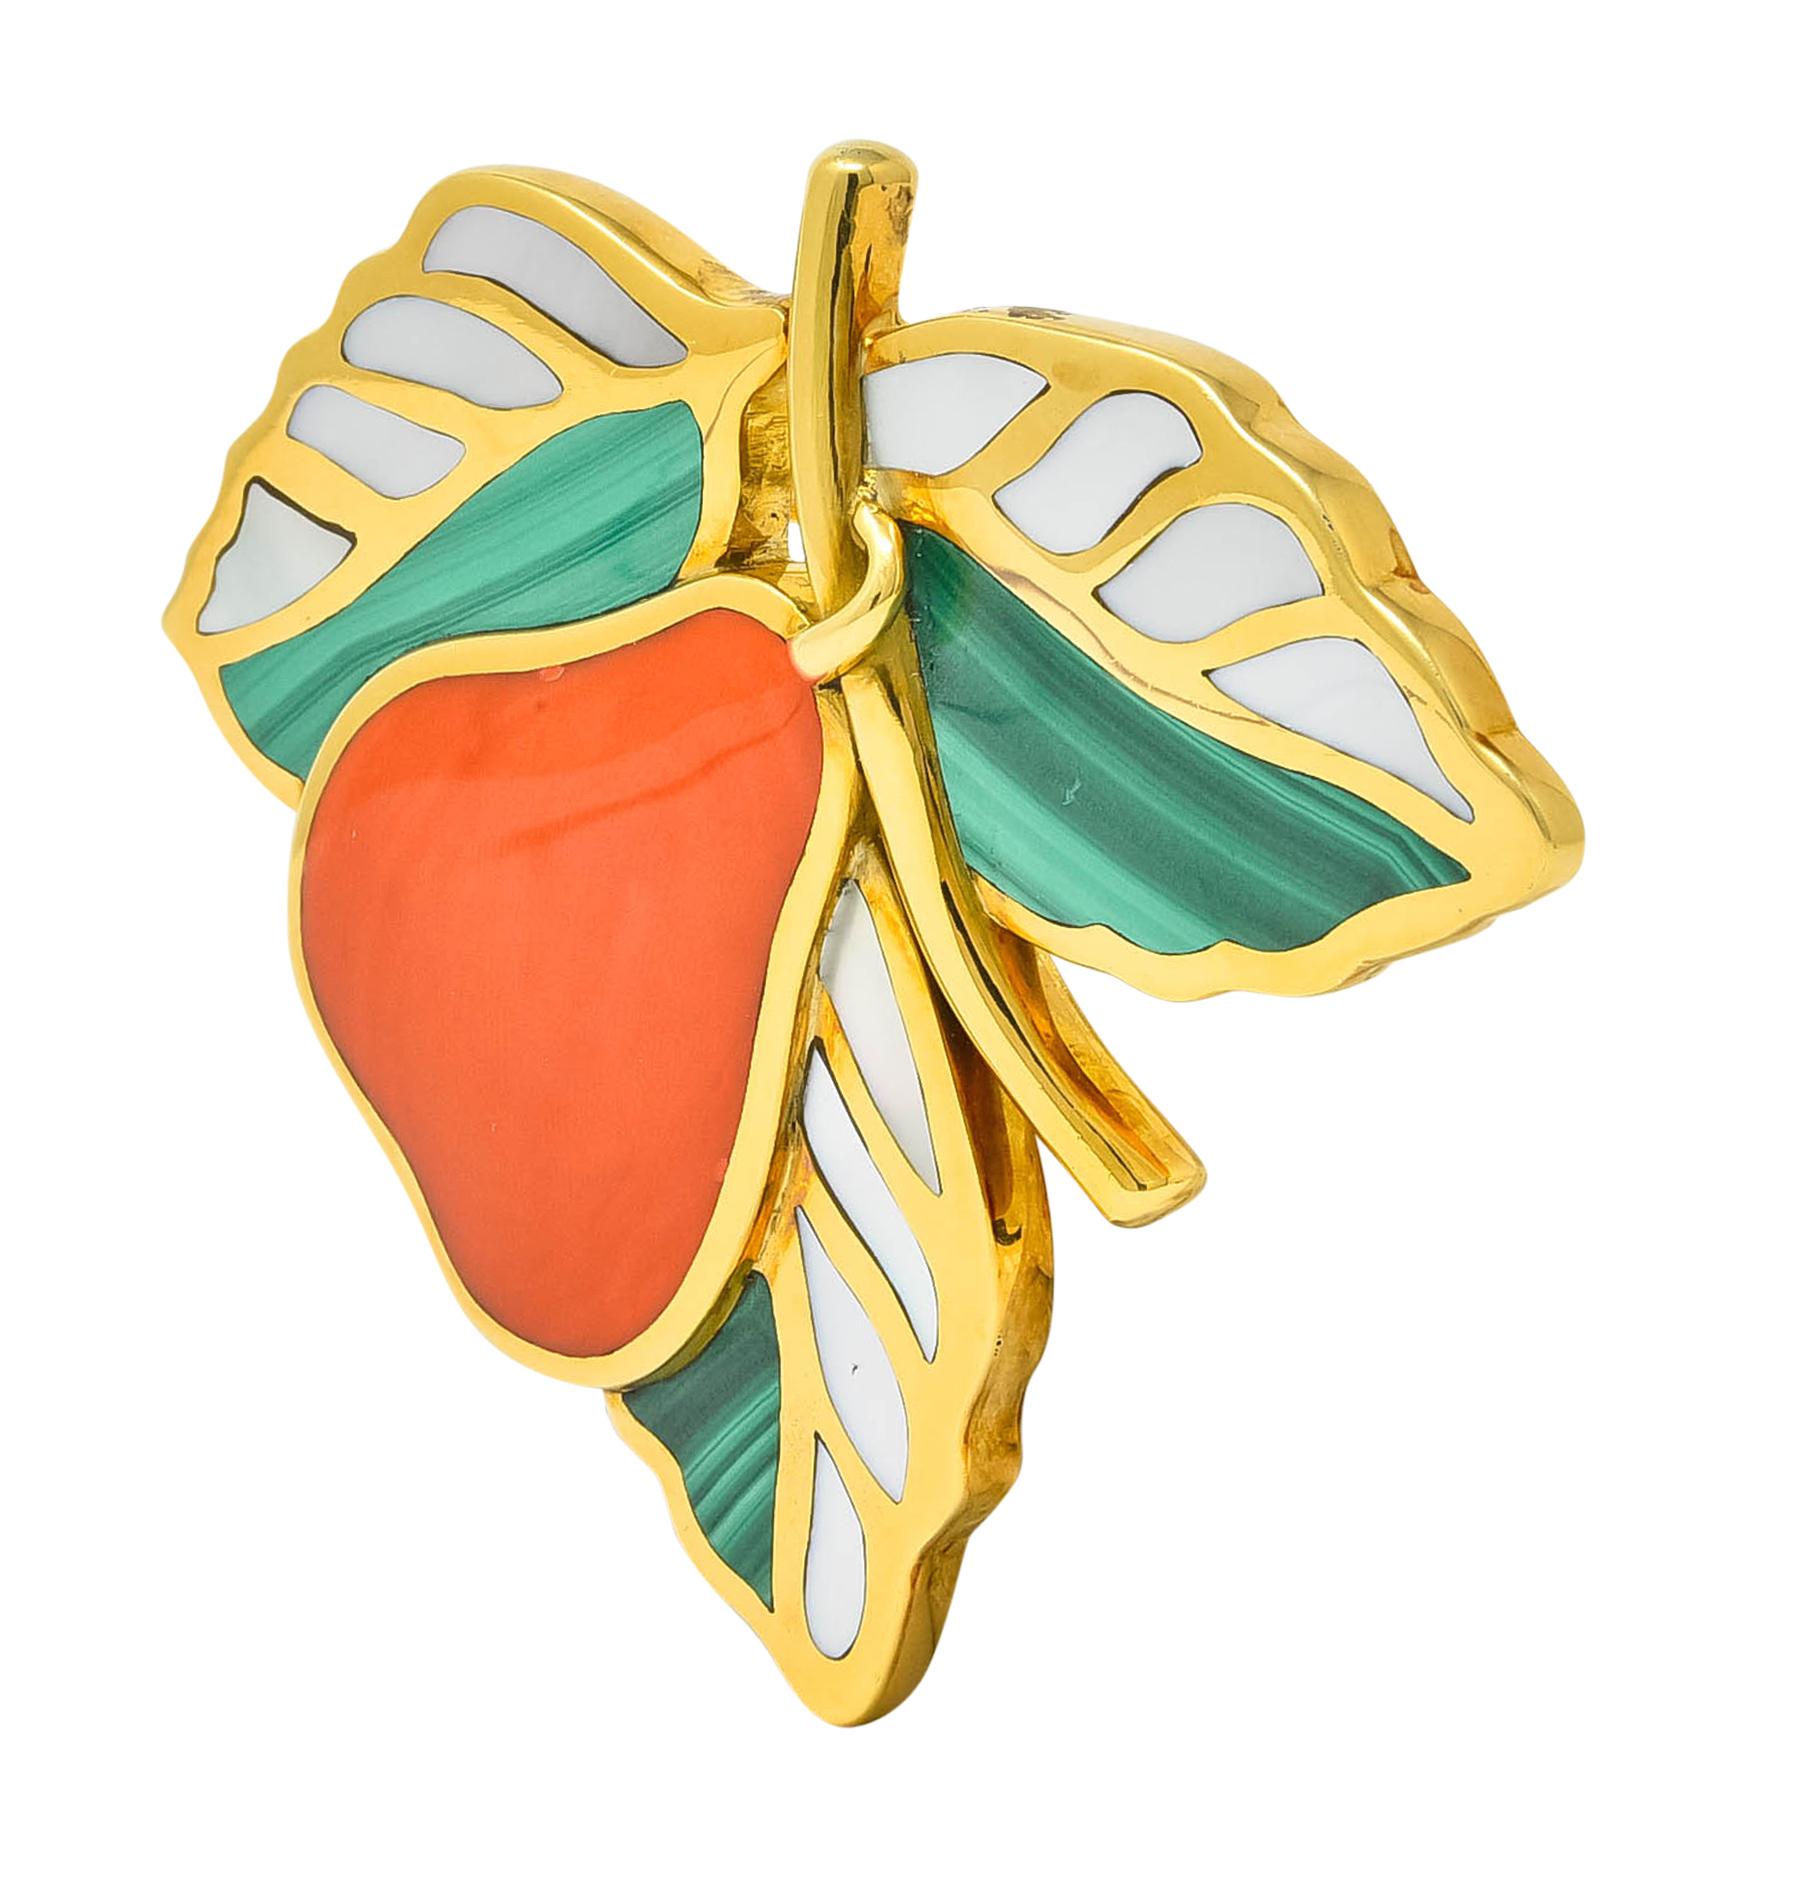 Brooch designed as a pear hanging from a polished gold branch, surrounded by three large leaves

Pear is comprised of a single piece of coral, inlaid in a polished gold surround, medium-light reddish-orange in color

Leaves are inlaid malachite,